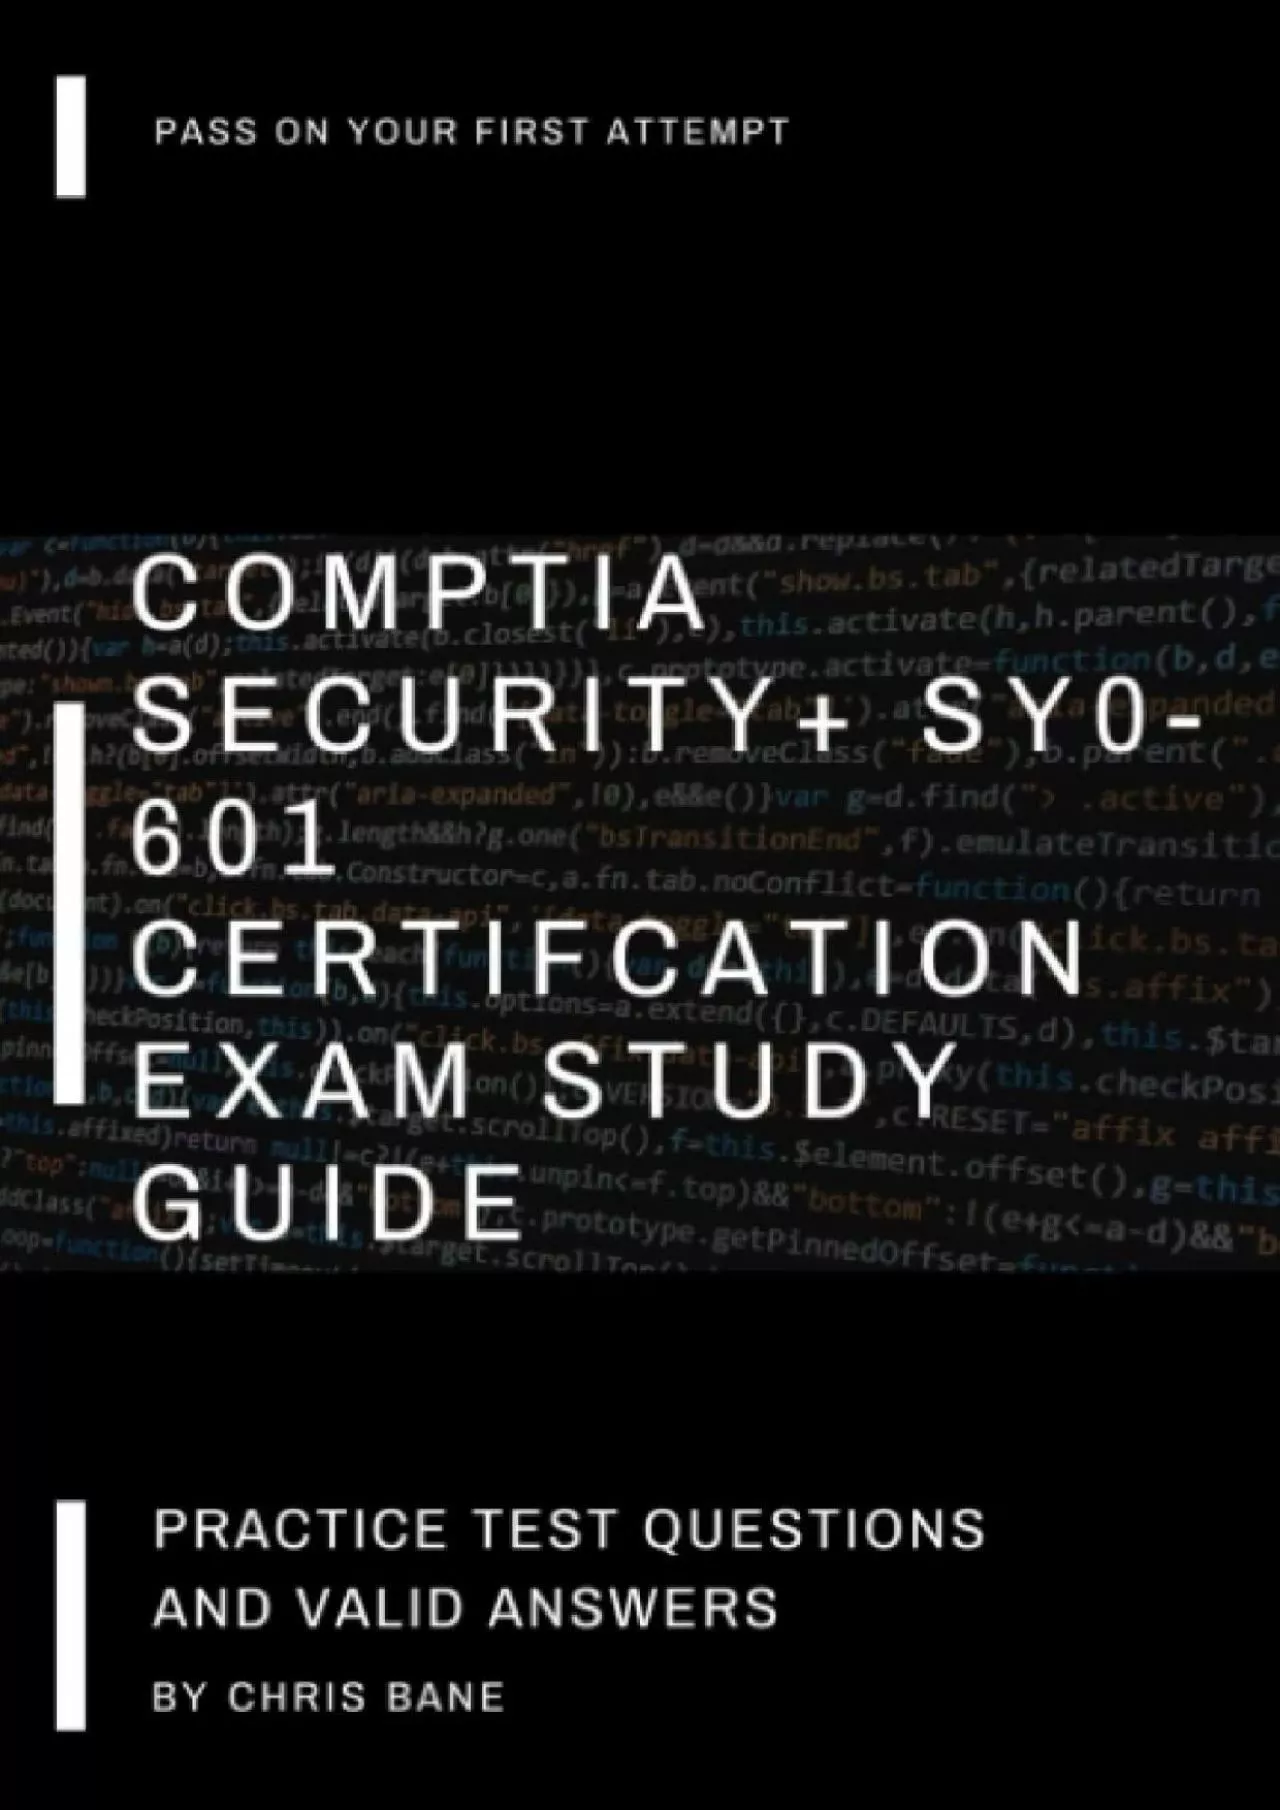 [PDF]-COMPTIA SECURITY+ SY0-601 CERTIFCATION EXAM STUDY GUIDE: PRACTICE TEST QUESTIONS